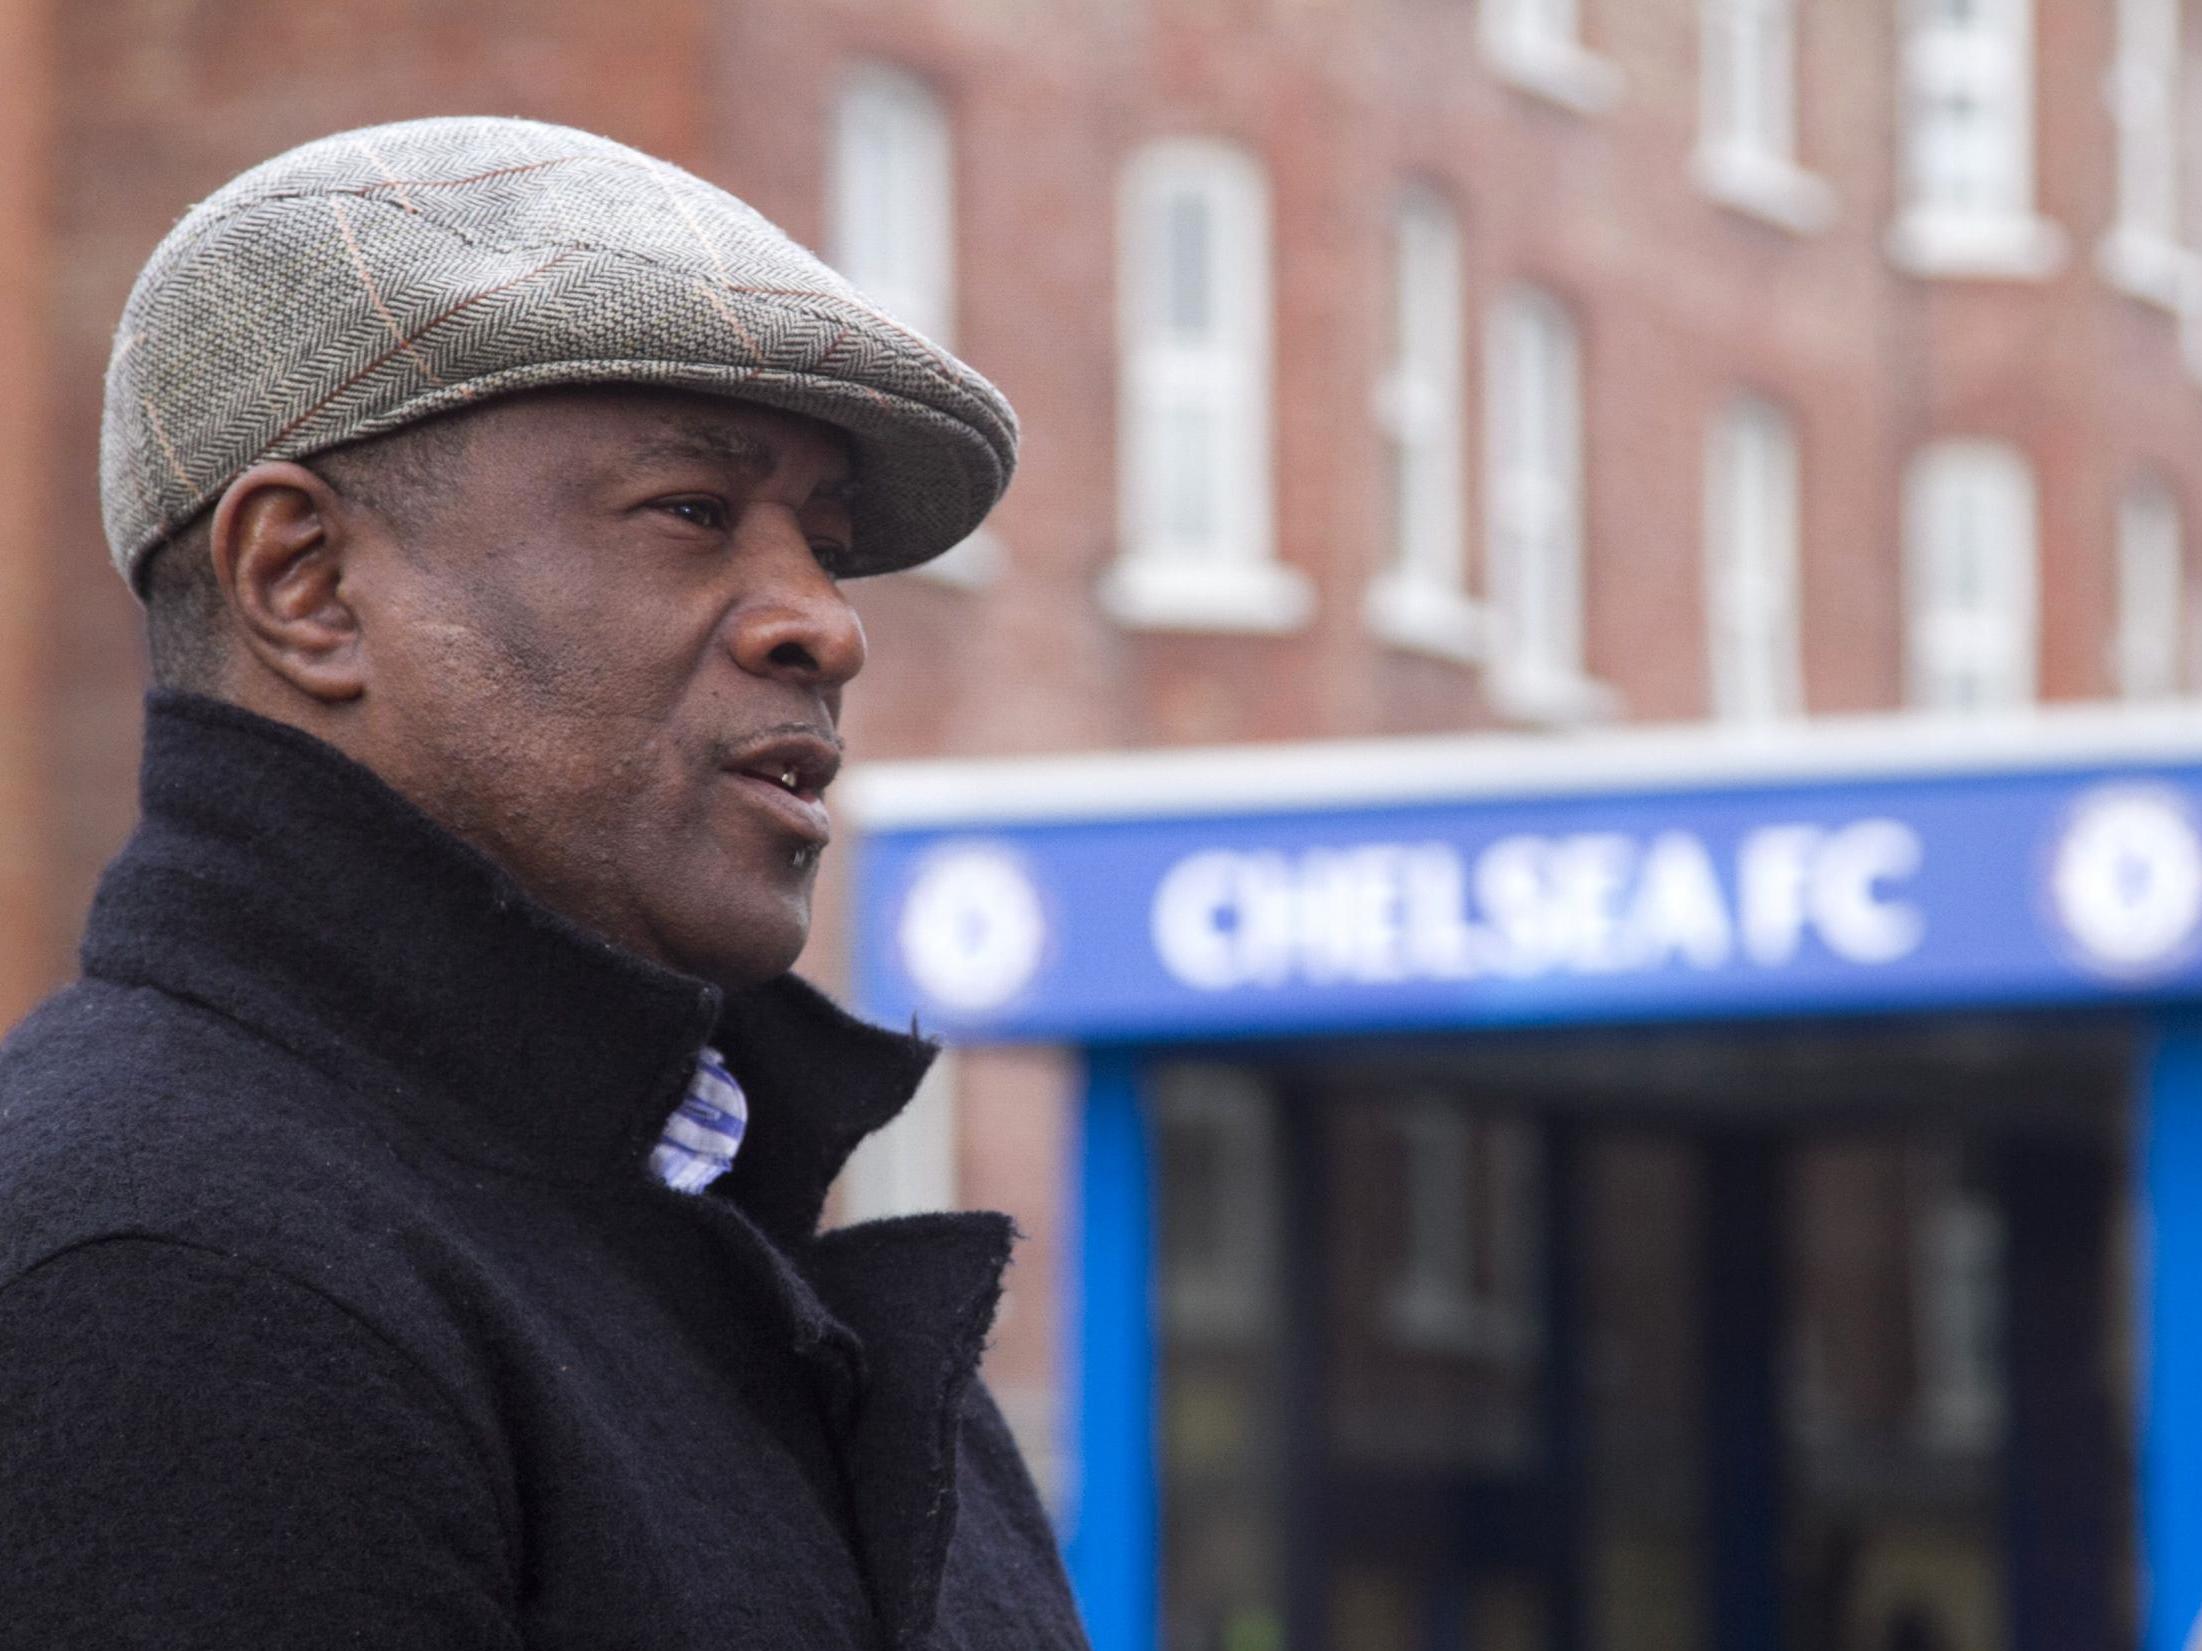 Paul Canoville was Chelsea's first black player 